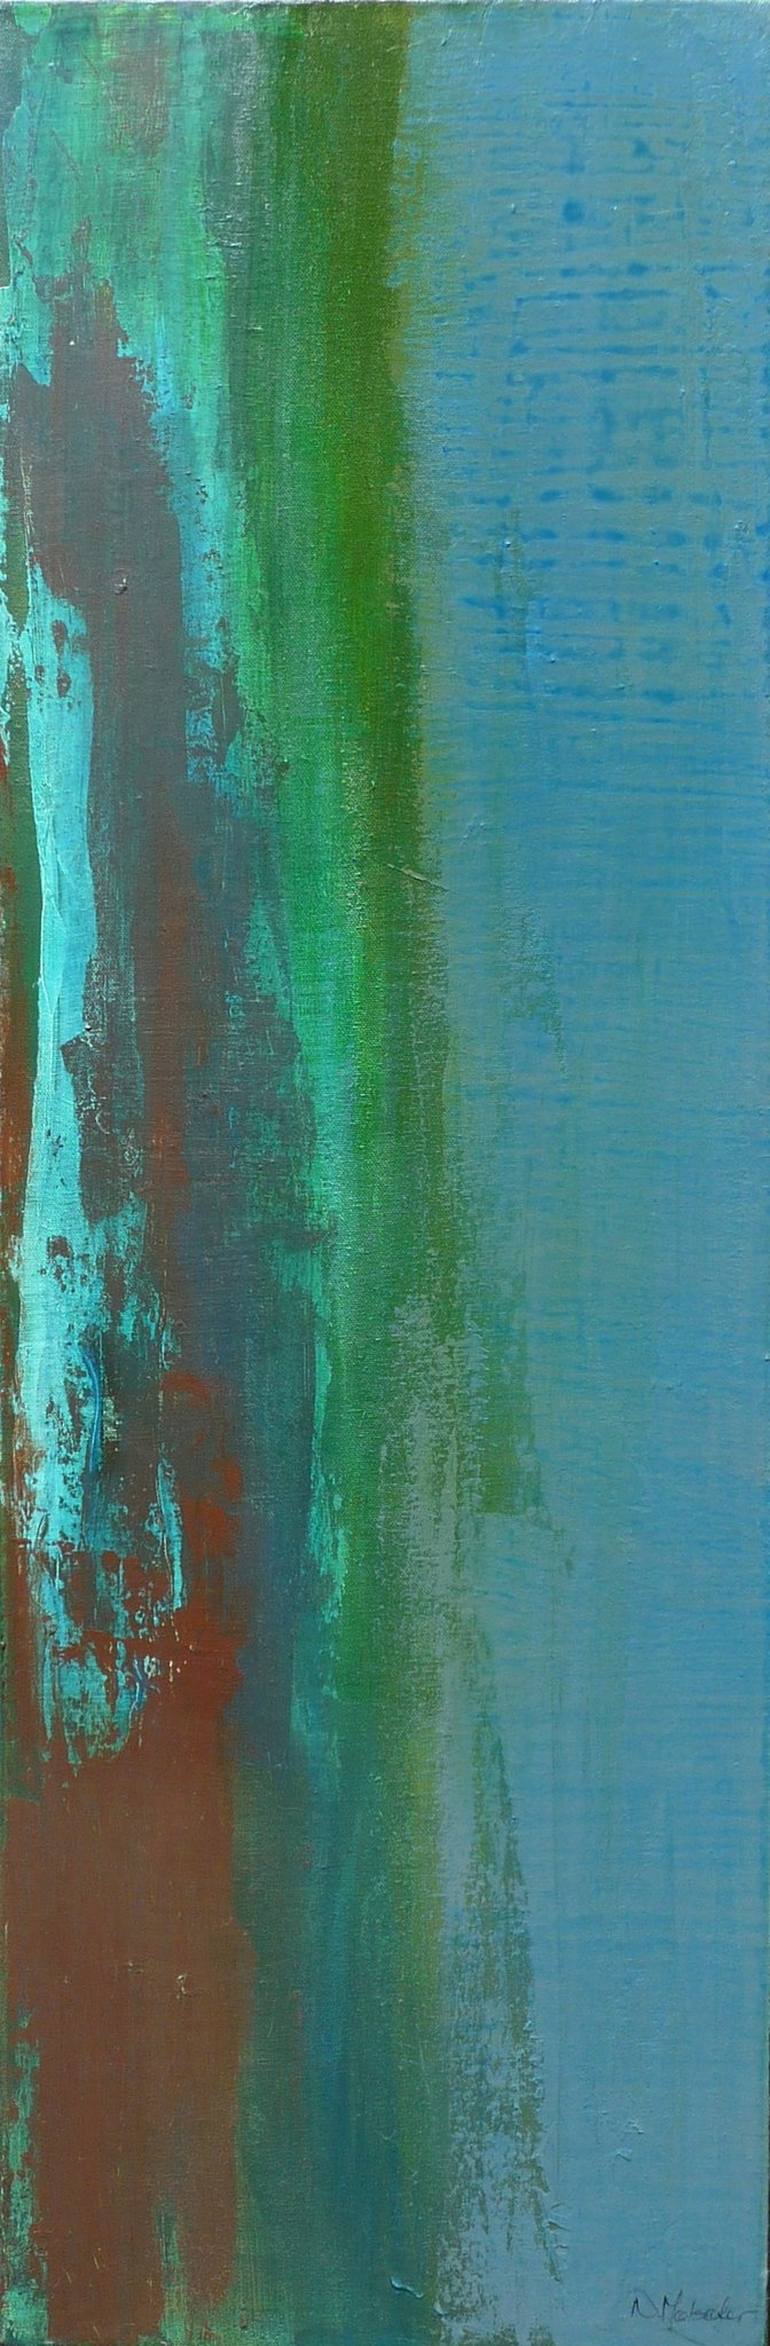 Original Abstract Painting by Norunn Mølsæter